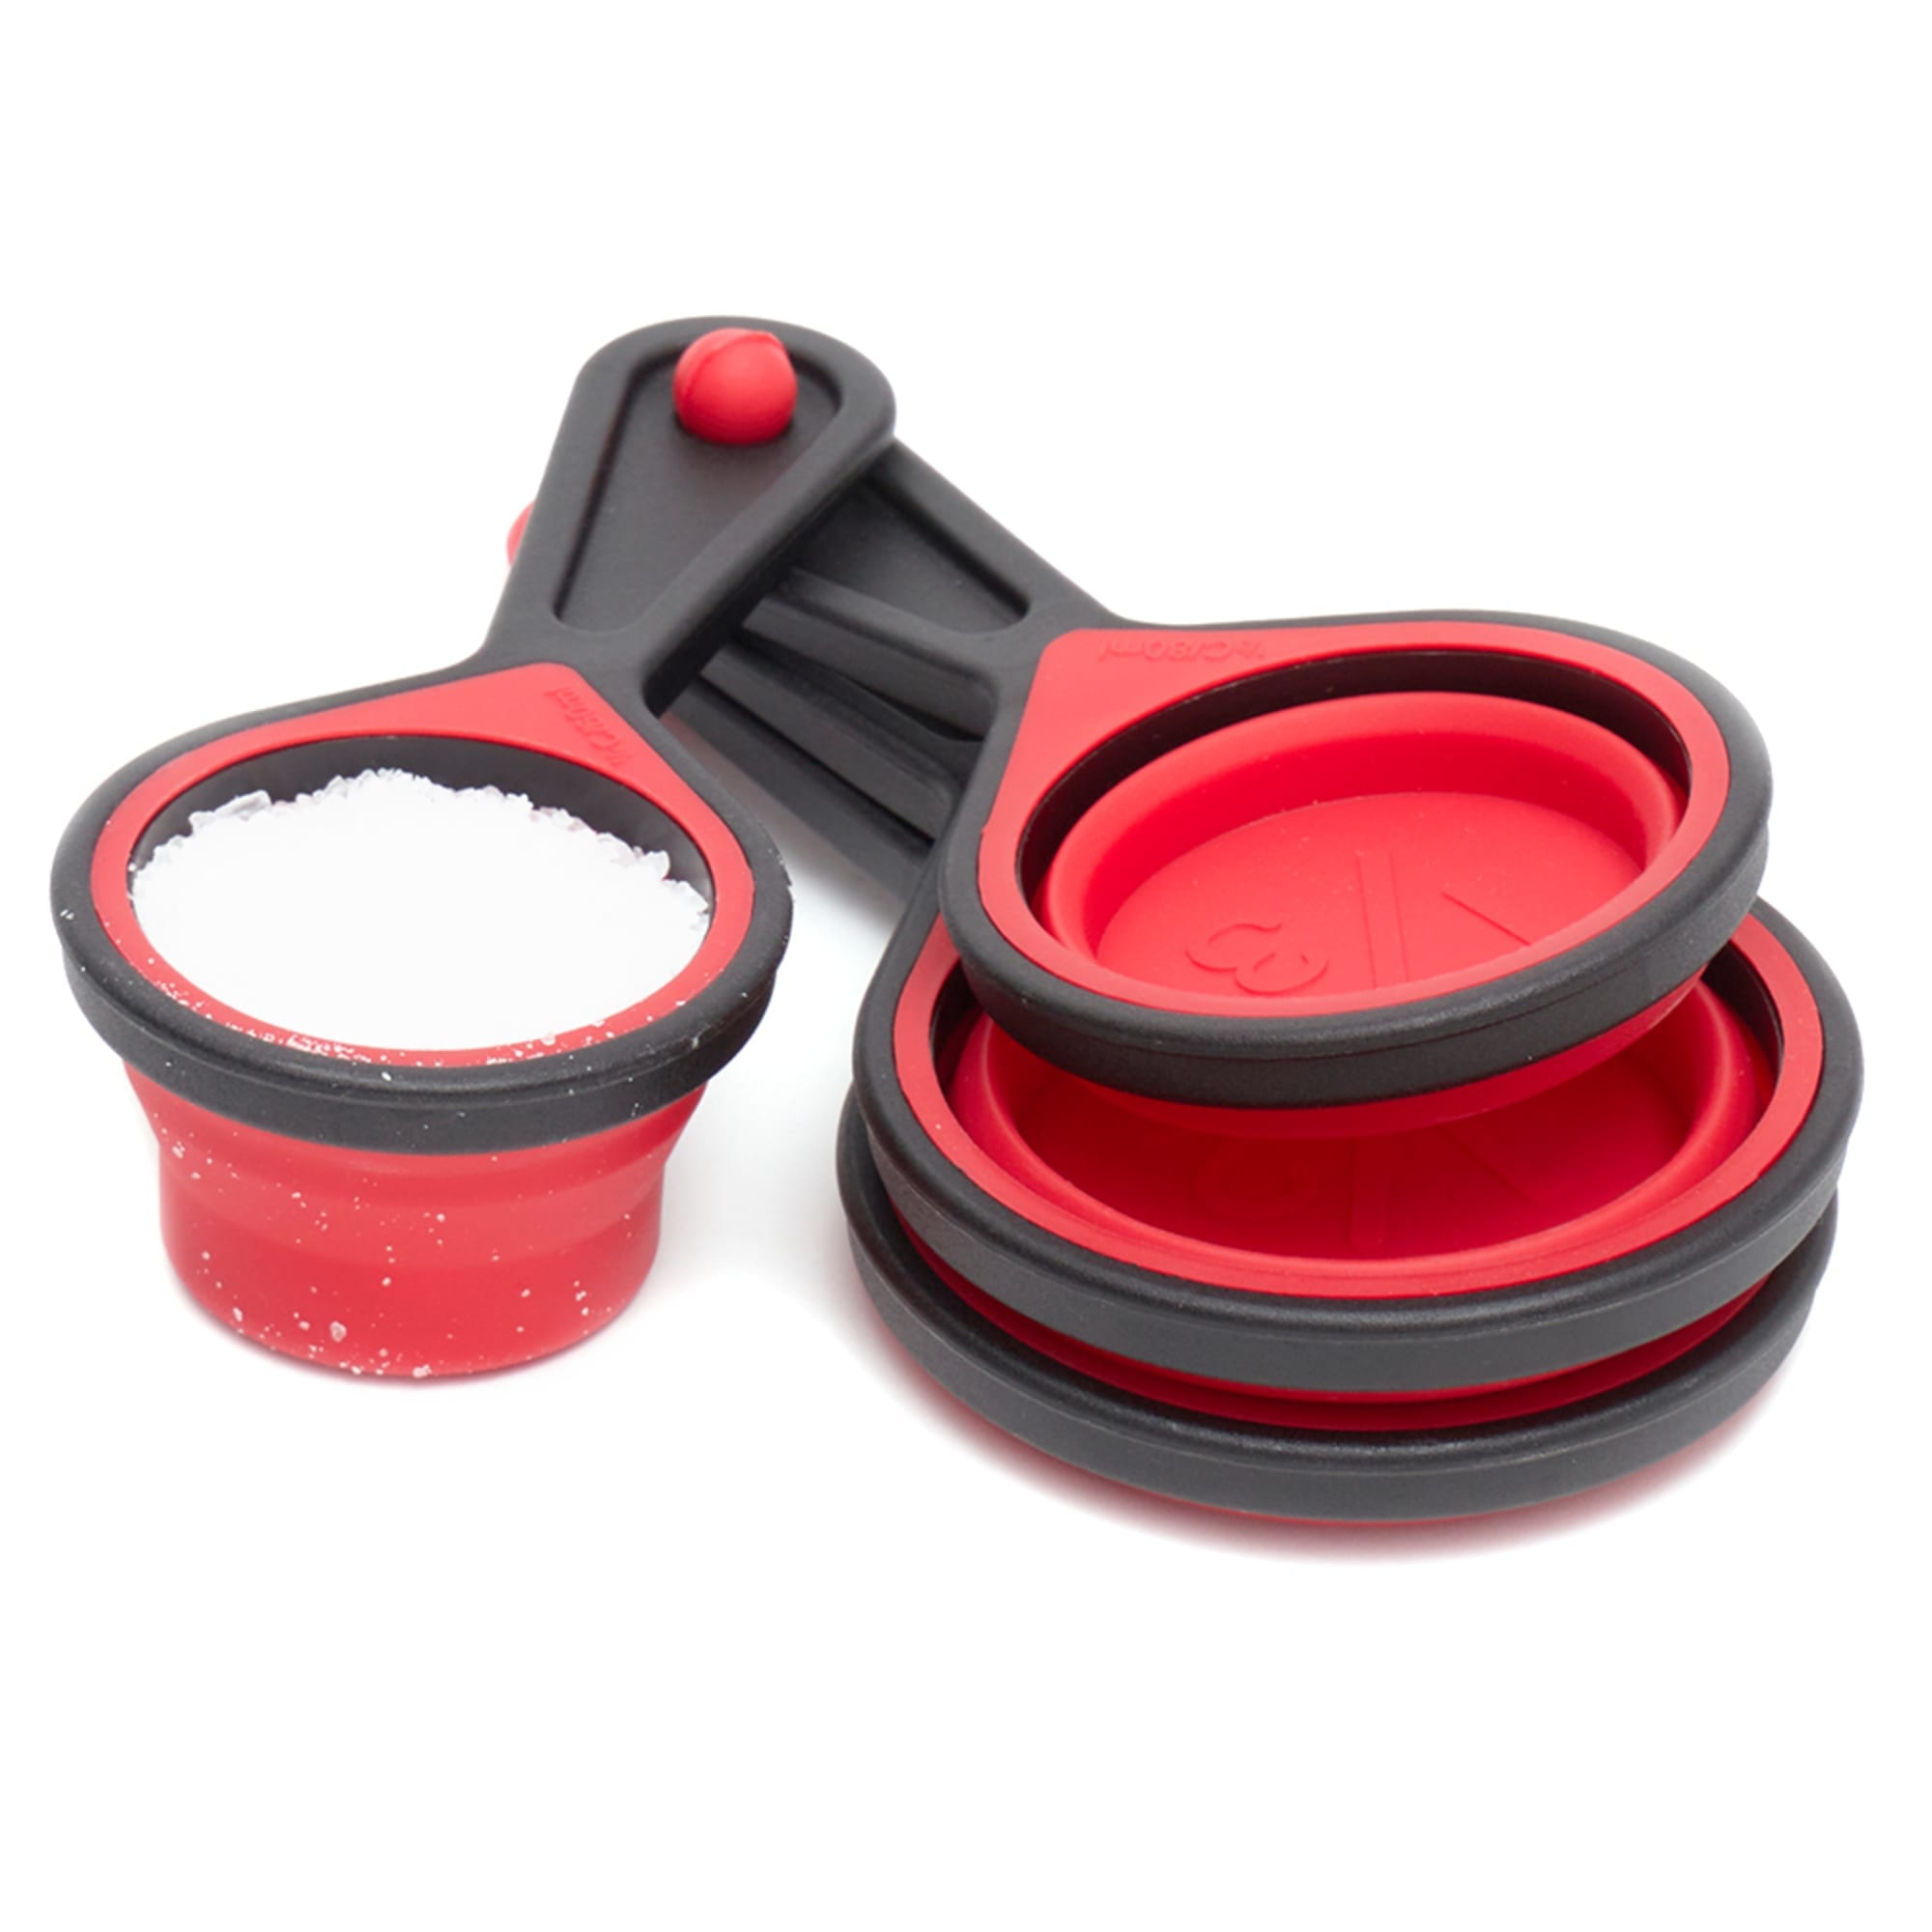 Home Basics 4 Piece Collapsible Measuring Cups $5.00 EACH, CASE PACK OF 24